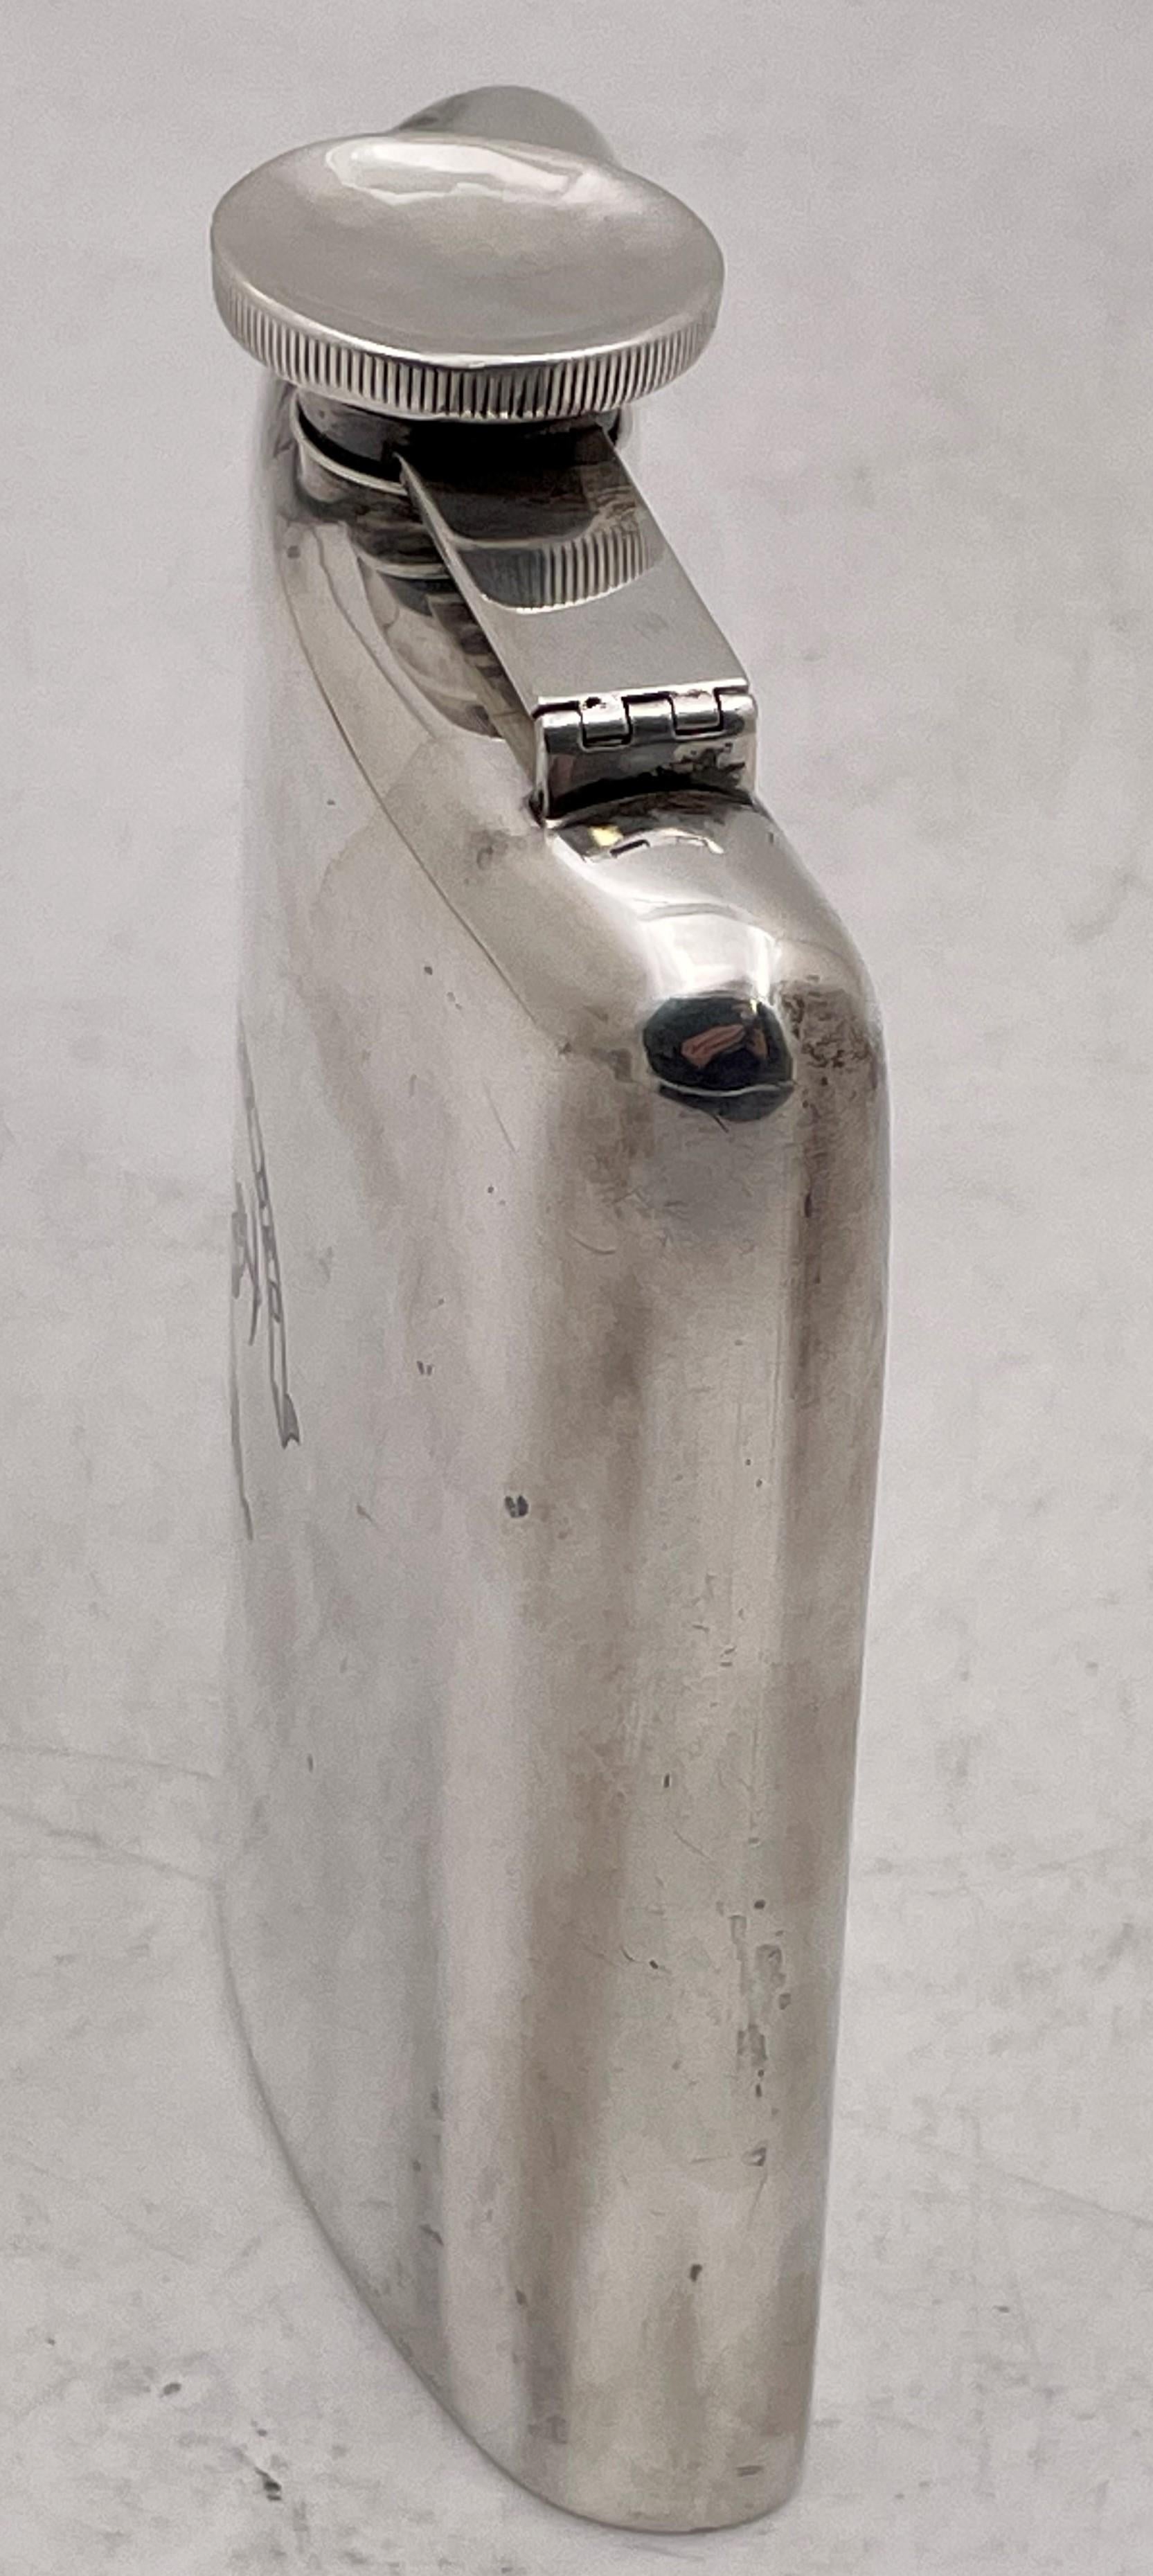 Webster sterling silver hip flask from the early 20th century, with an engraved design at the center, having a screw top, measuring 5 1/8'' in length by 4 3/8'' in width by 1 1/4'' in height, containing half a pint, and bearing hallmarks as shown.